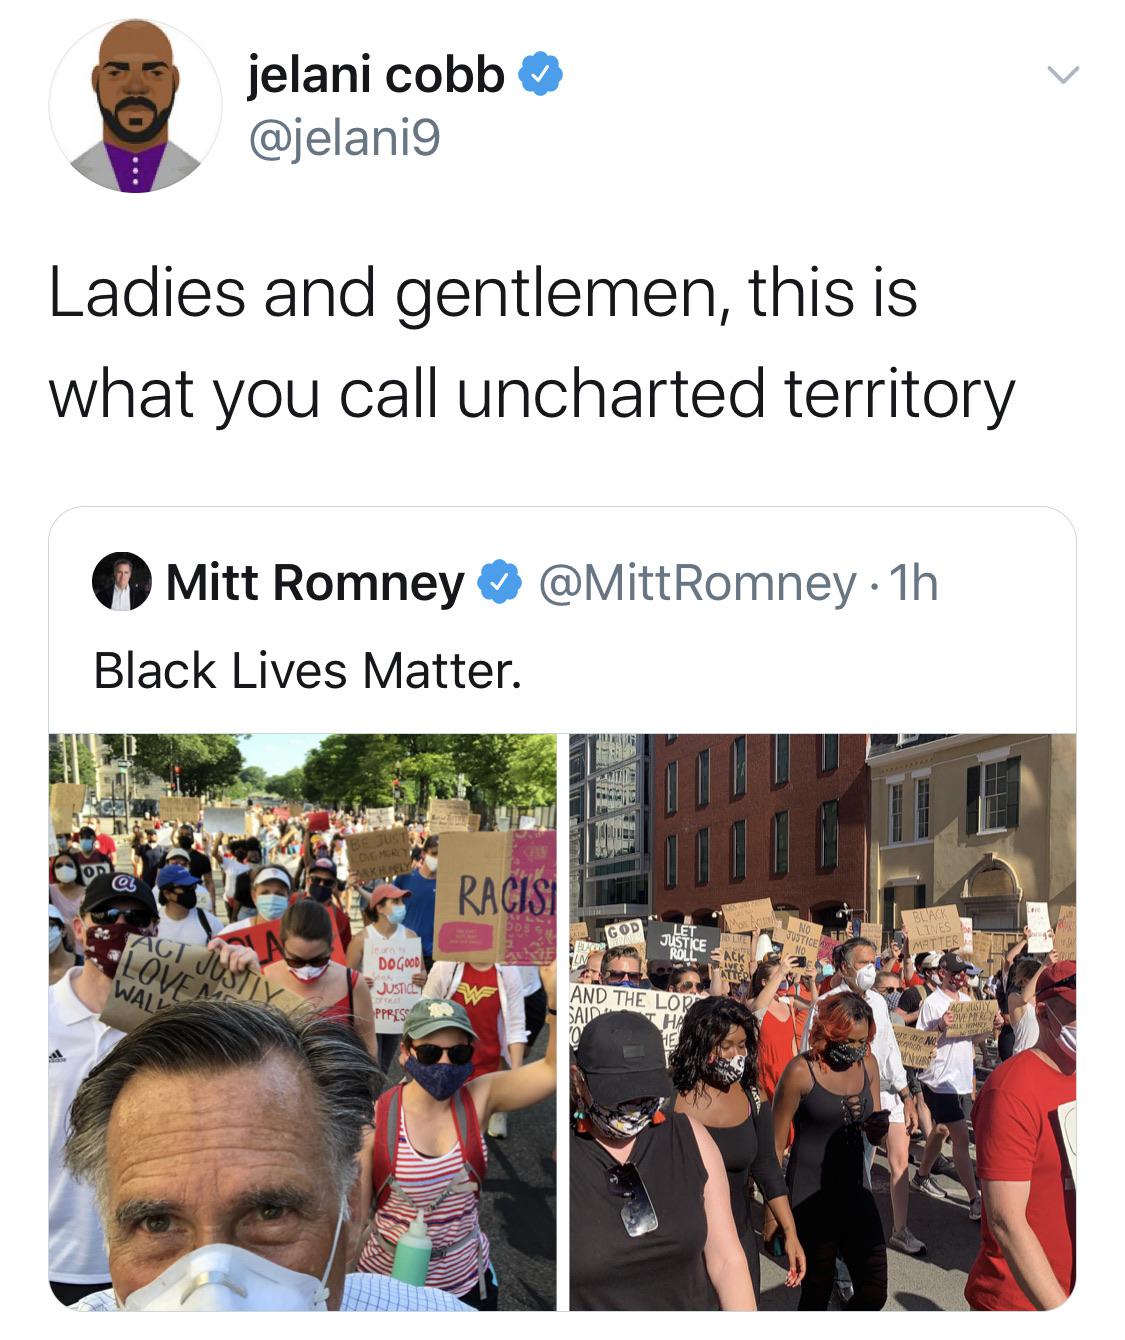 Tweets, Trump, Romney, Republicans, NASCAR, Mitt Romney Black Twitter Memes Tweets, Trump, Romney, Republicans, NASCAR, Mitt Romney text: jelani cobb @jelani9 Ladies and gentlemen, this is what you call uncharted territory O Mitt Romney @MittRomney Black Lives Matter. AND THE 1-0 